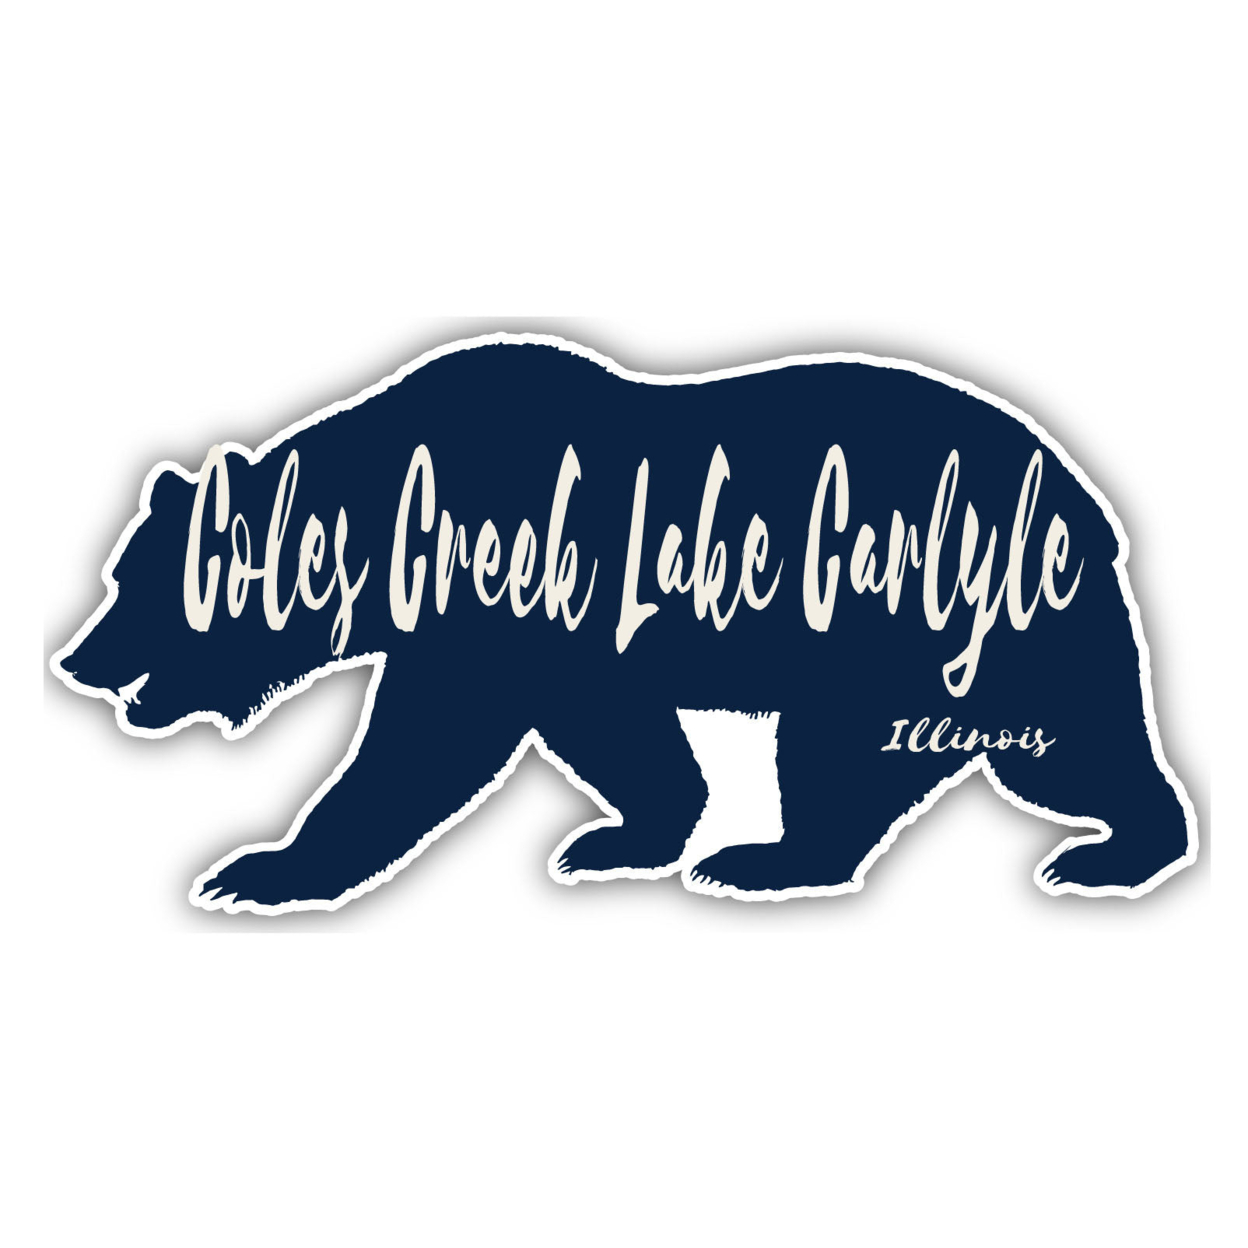 Coles Creek Lake Carlyle Illinois Souvenir Decorative Stickers (Choose Theme And Size) - 4-Pack, 4-Inch, Bear